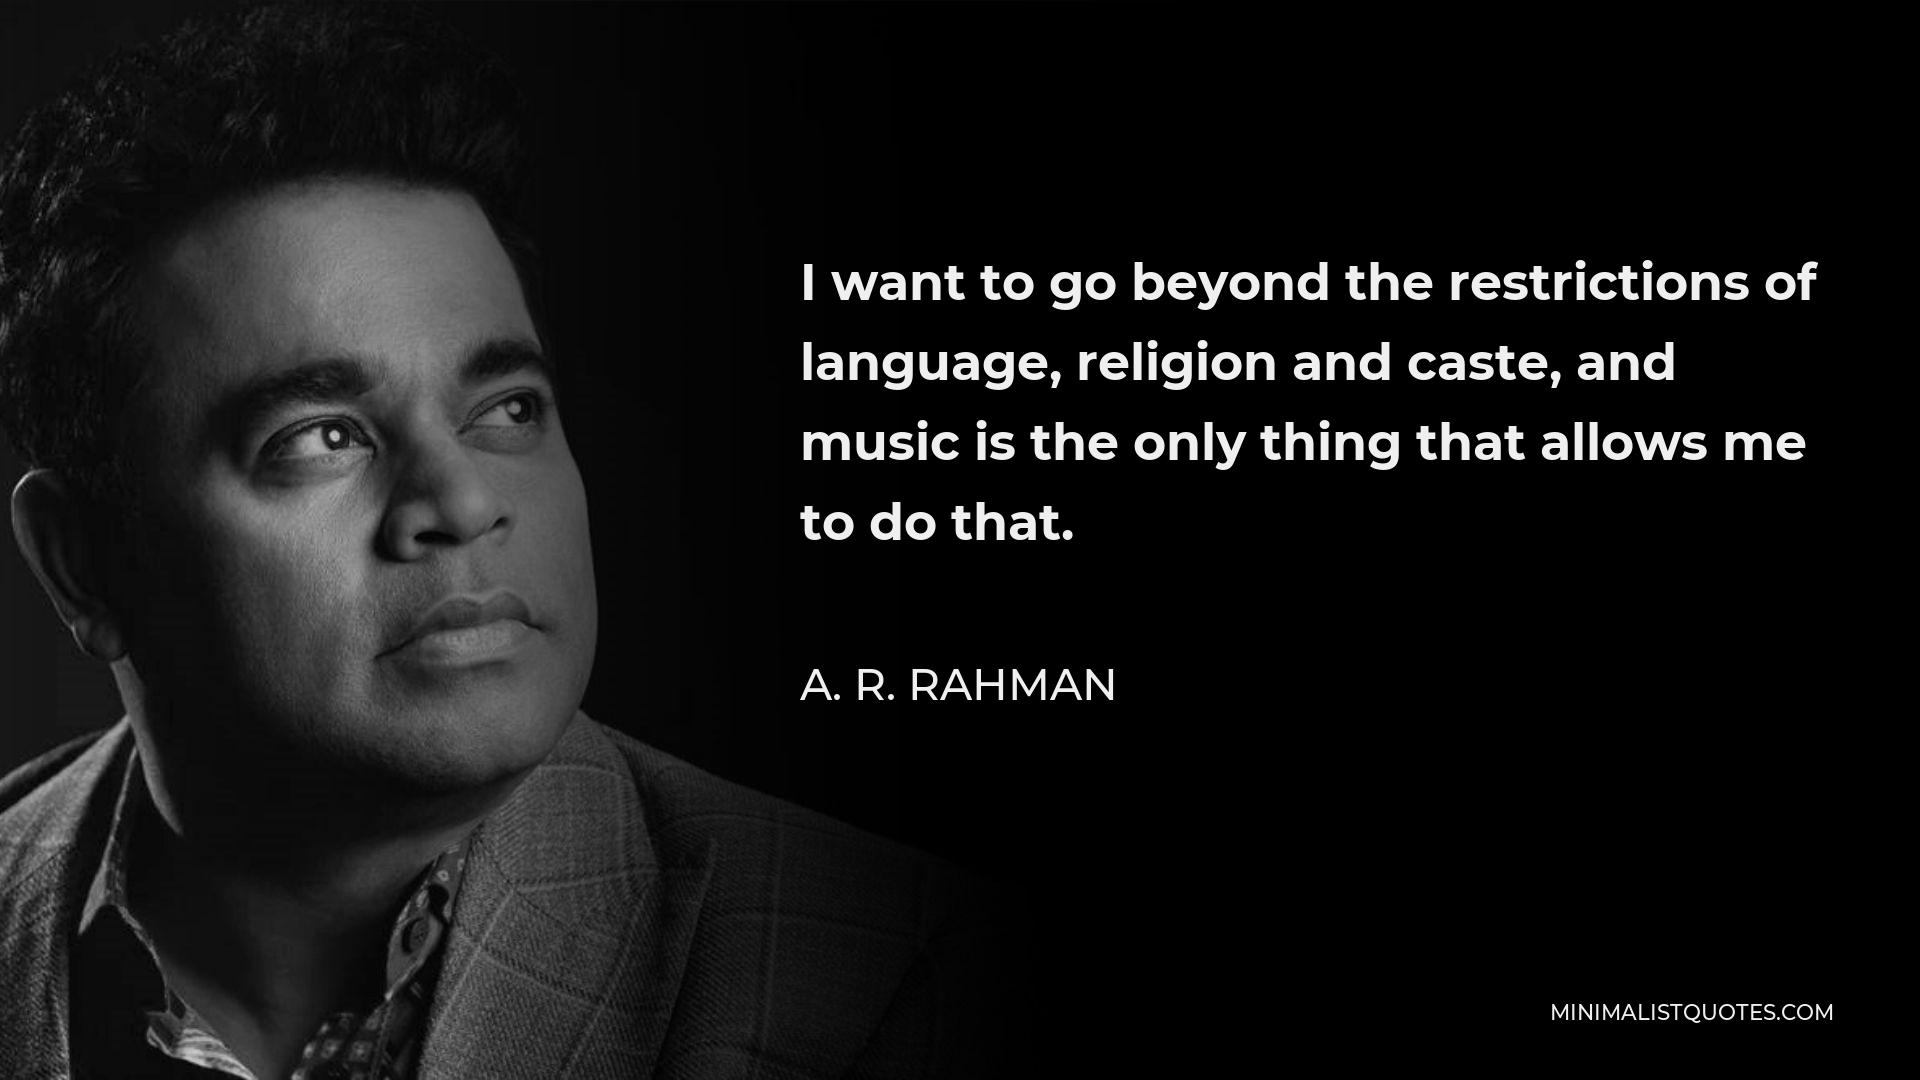 A. R. Rahman Quote - I want to go beyond the restrictions of language, religion and caste, and music is the only thing that allows me to do that.